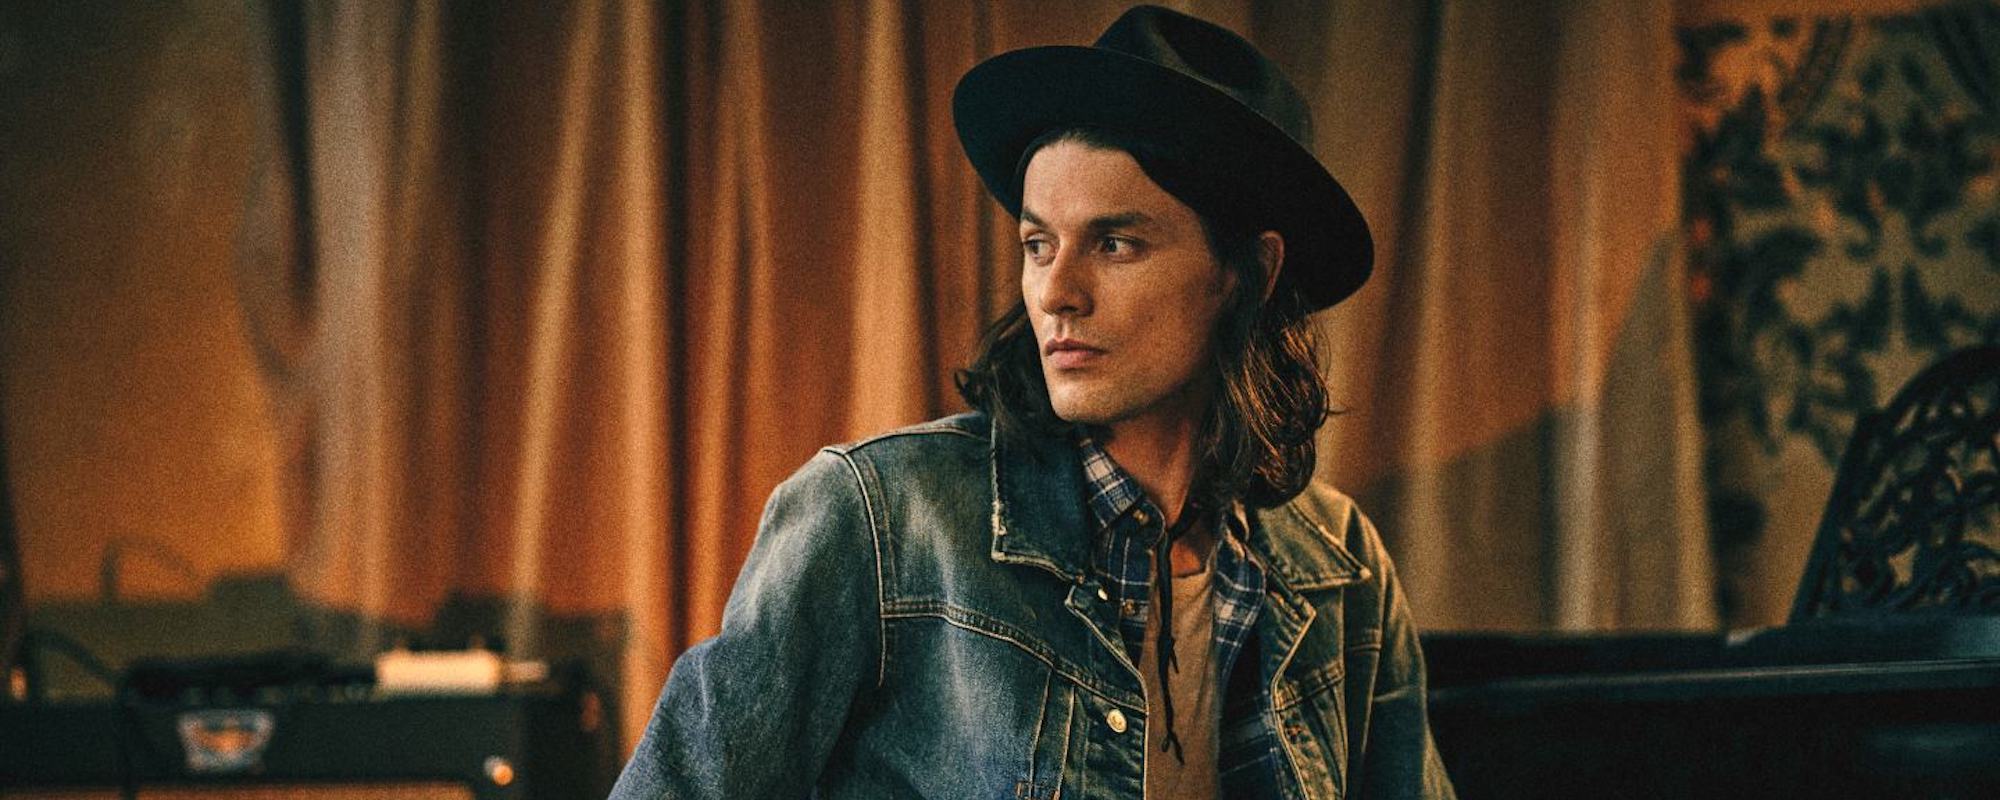 3 Songs You Didn’t Know James Bay Wrote